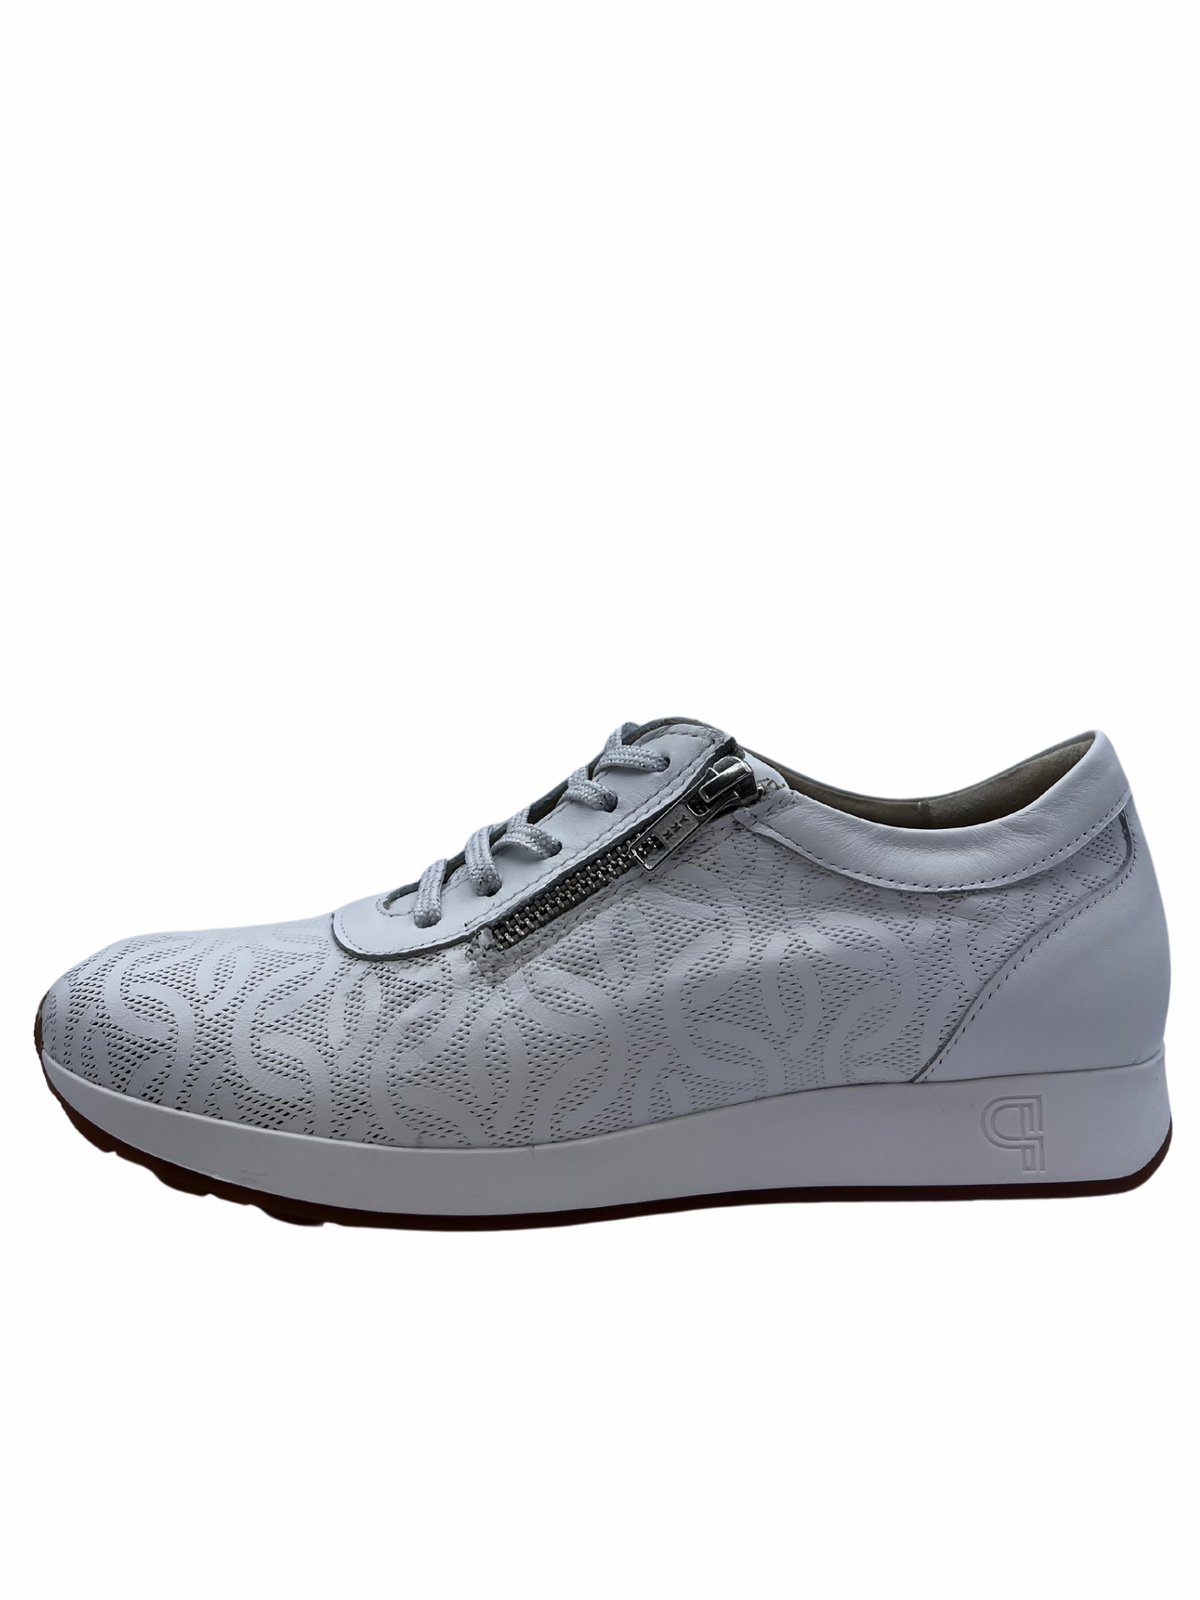 Pitillos White Leather Trainer With Perforated Details